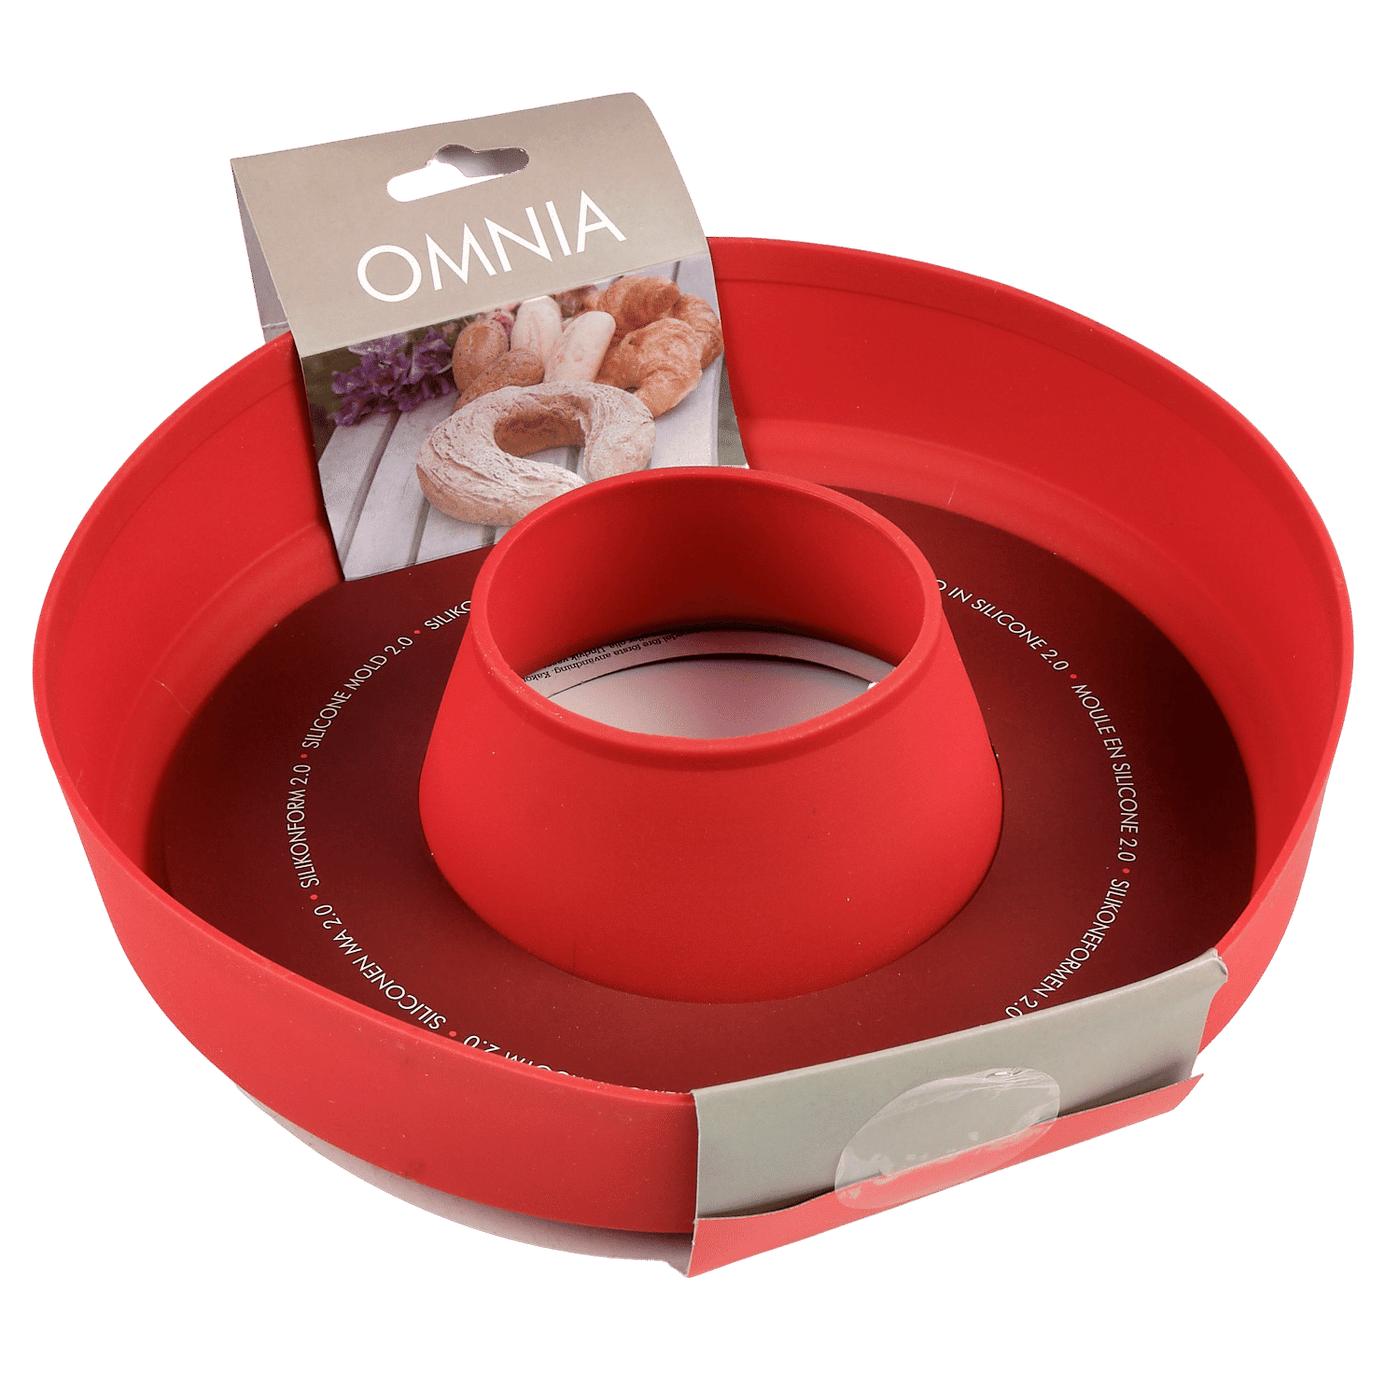 Omnia Oven Patissier Set - Camping Gift